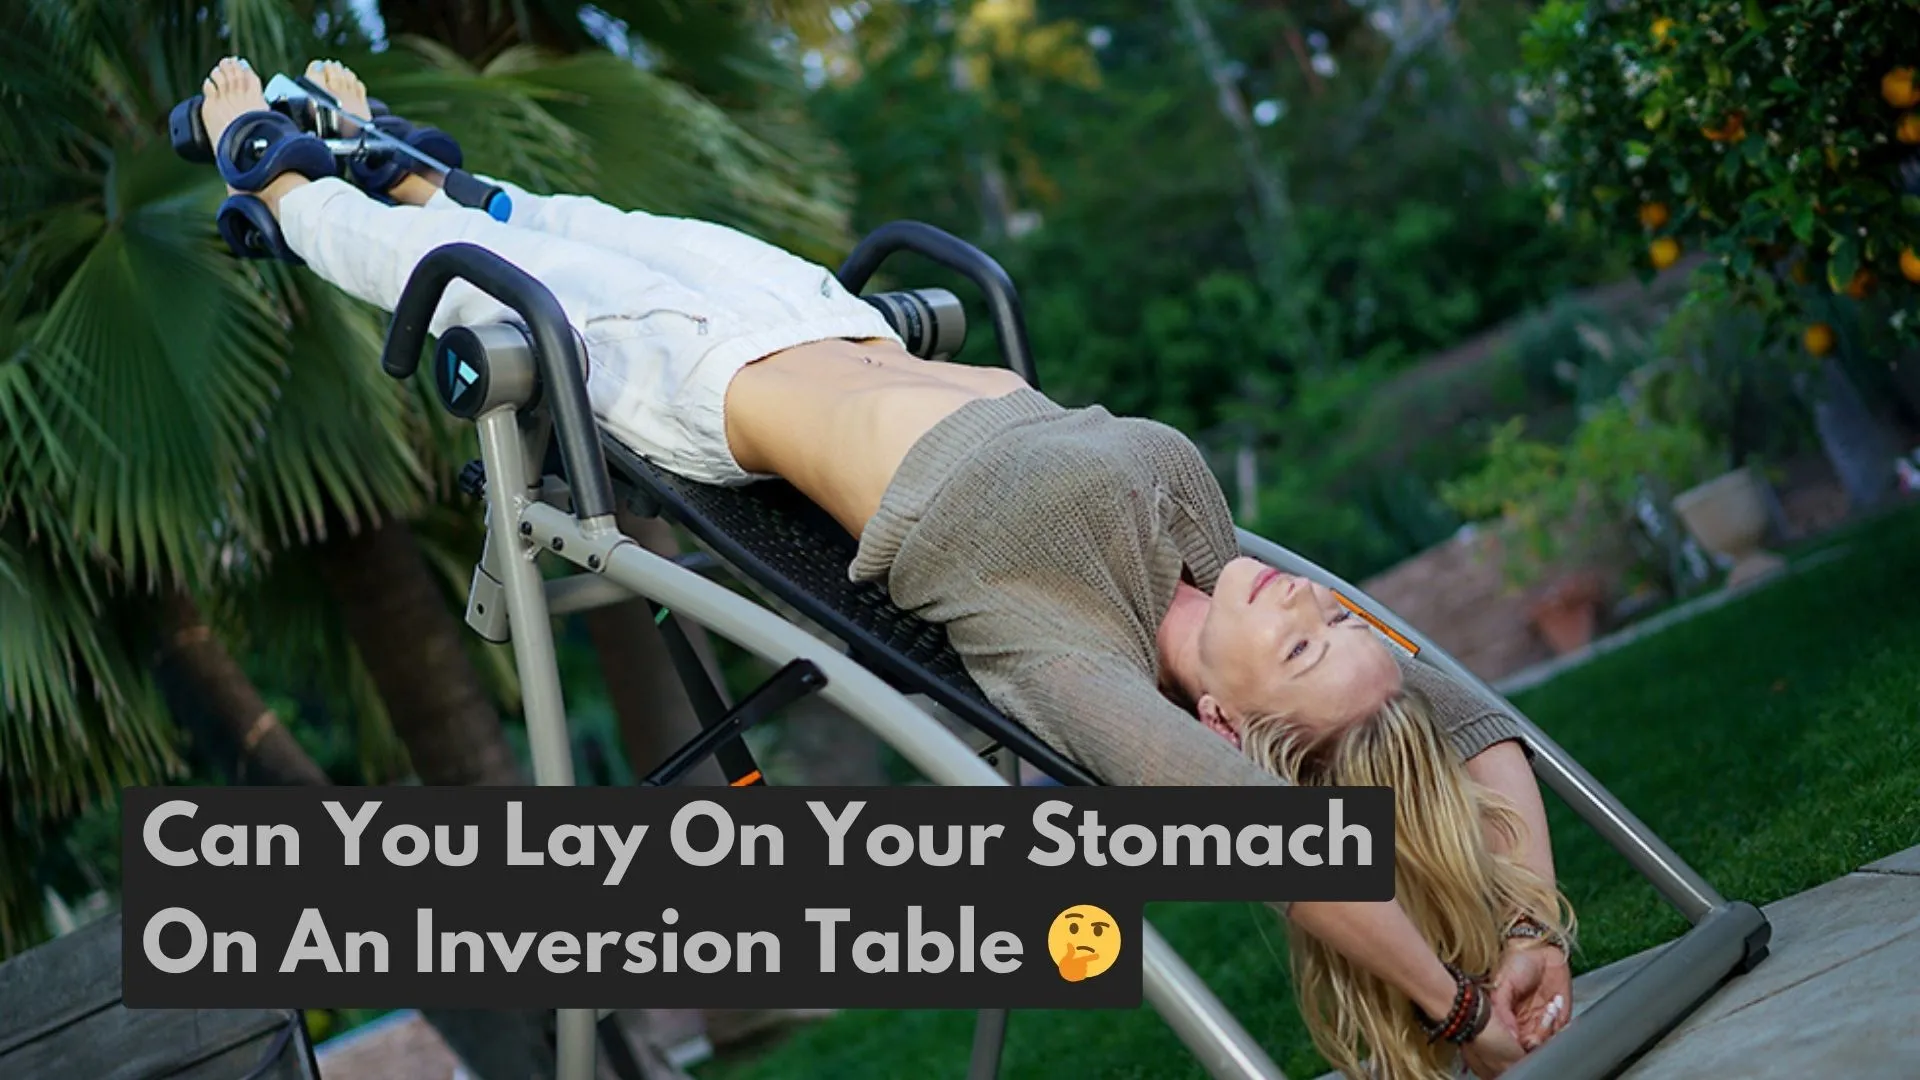 Can You Lay On Your Stomach On An Inversion Table 🤔 by InversionTableHub.Com and Inversion Table Hub